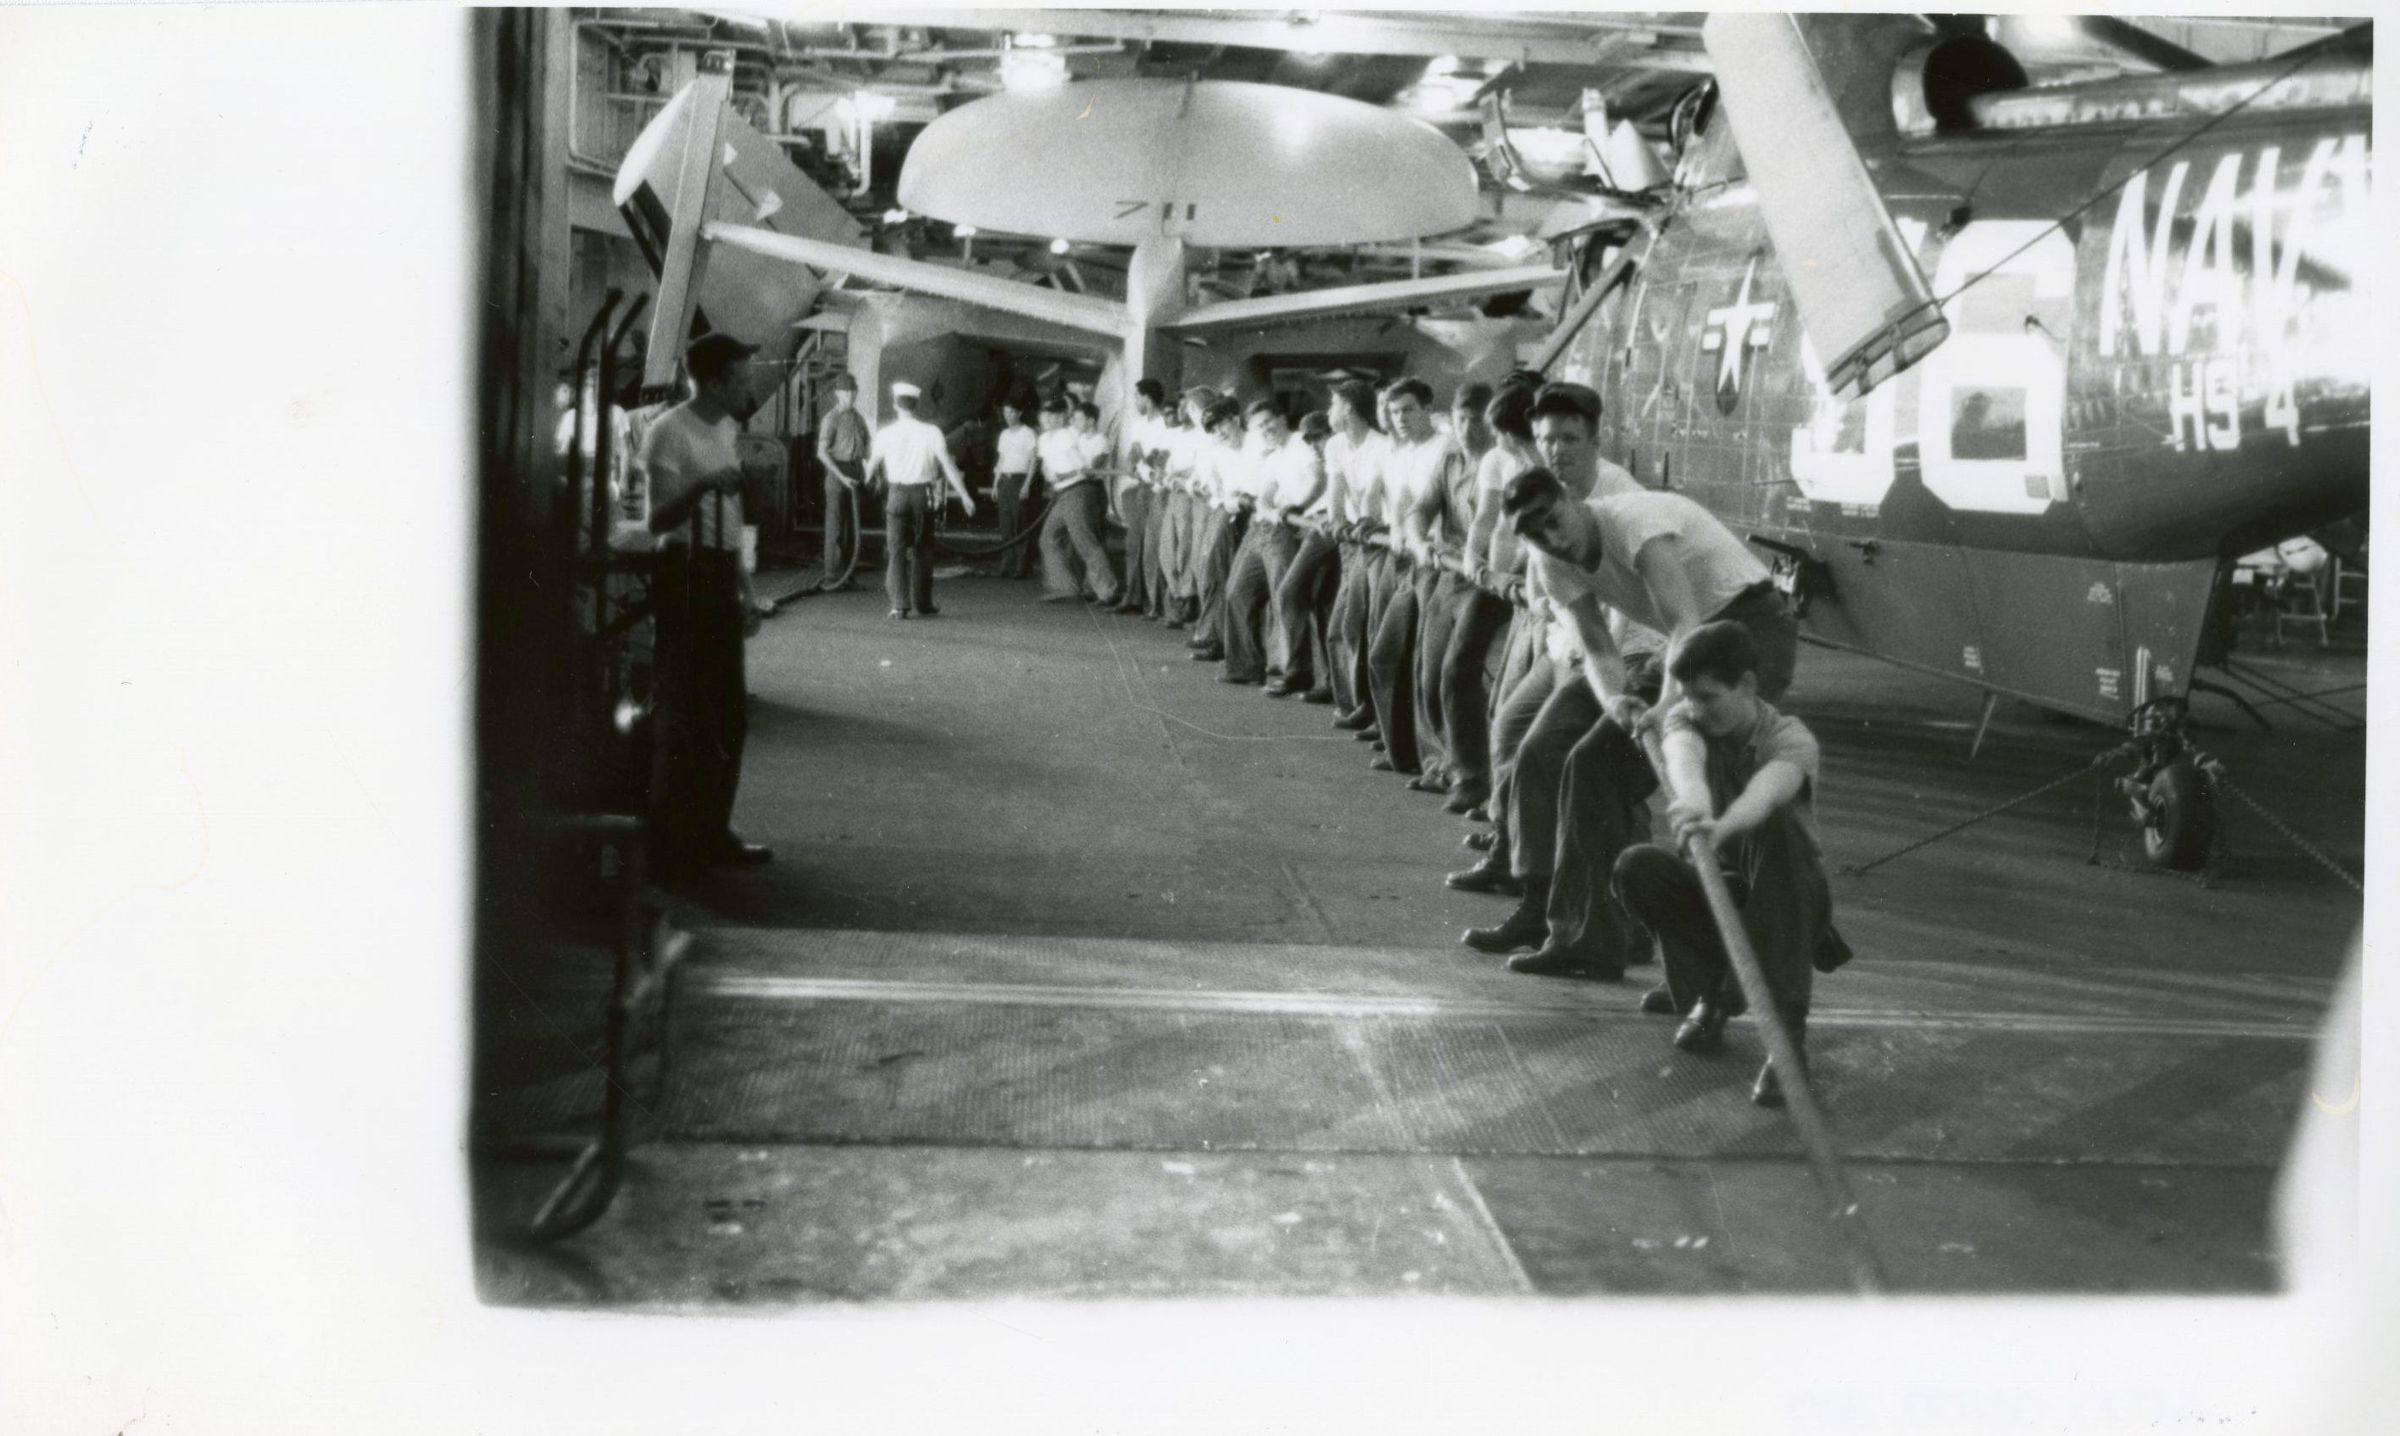 Primary Image of Crewmembers Working in the Hanger Deck